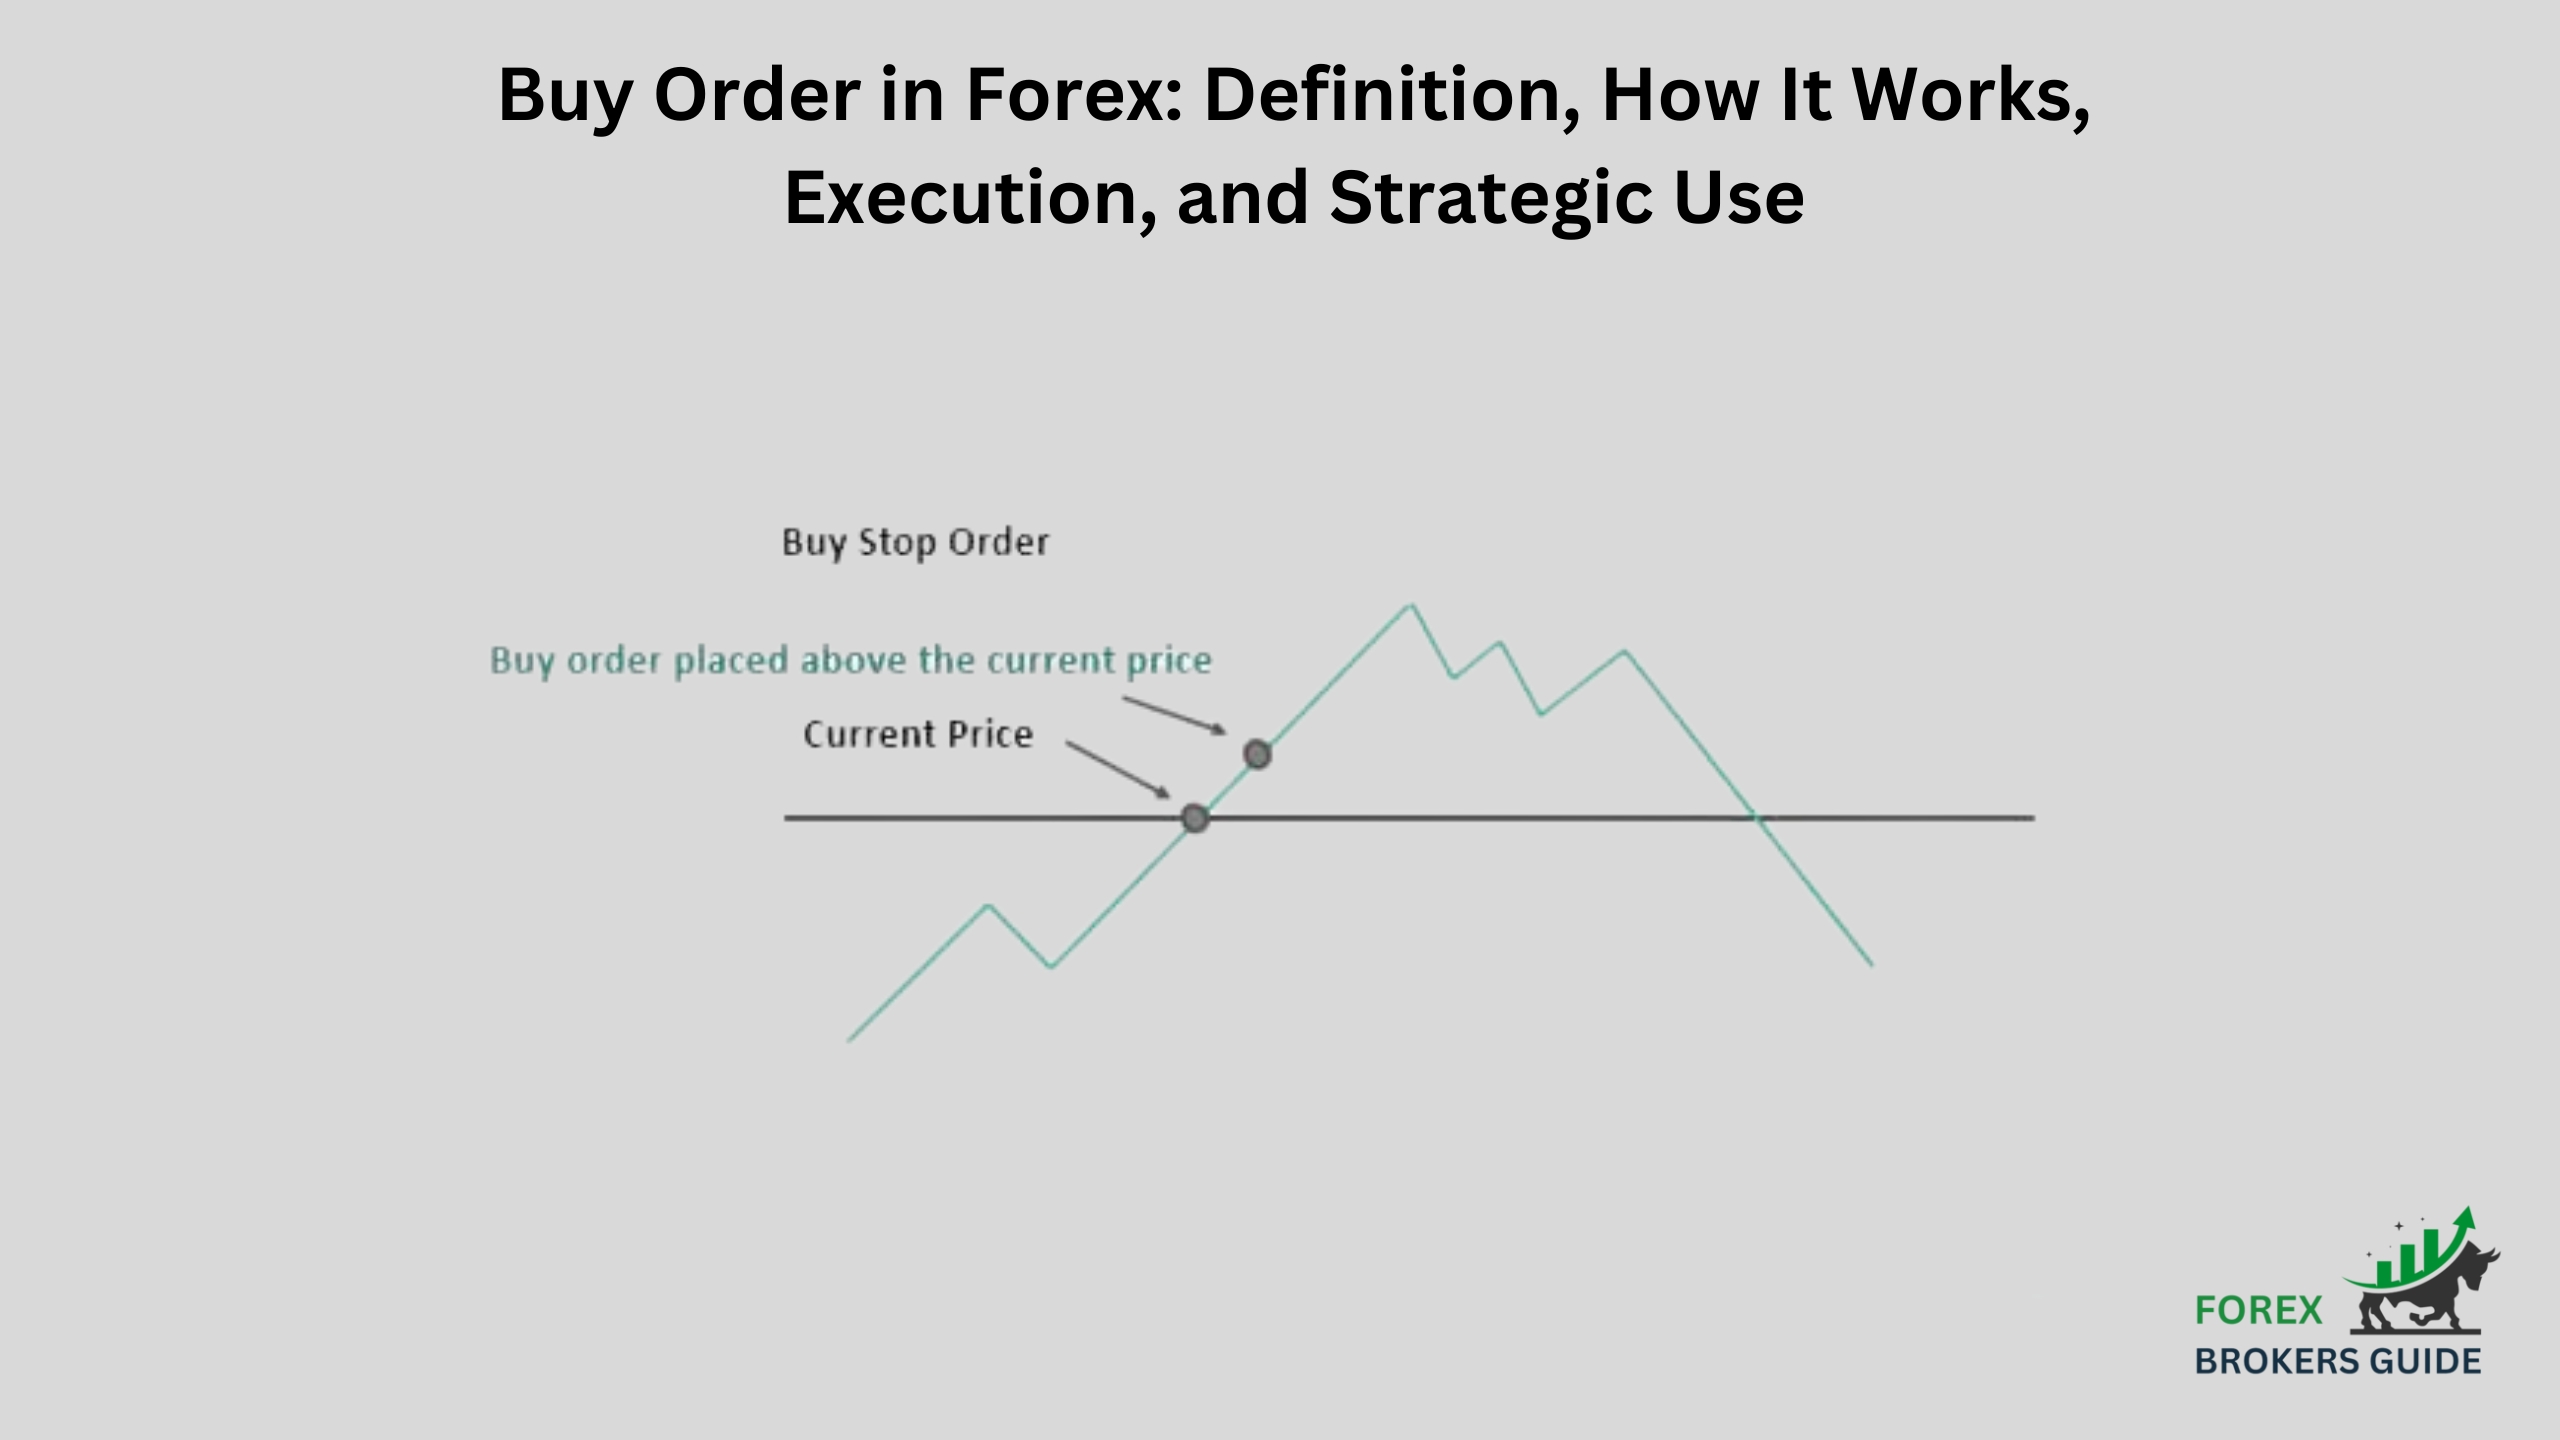 Buy Order in Forex Definition, How It Works, Execution, and Strategic Use